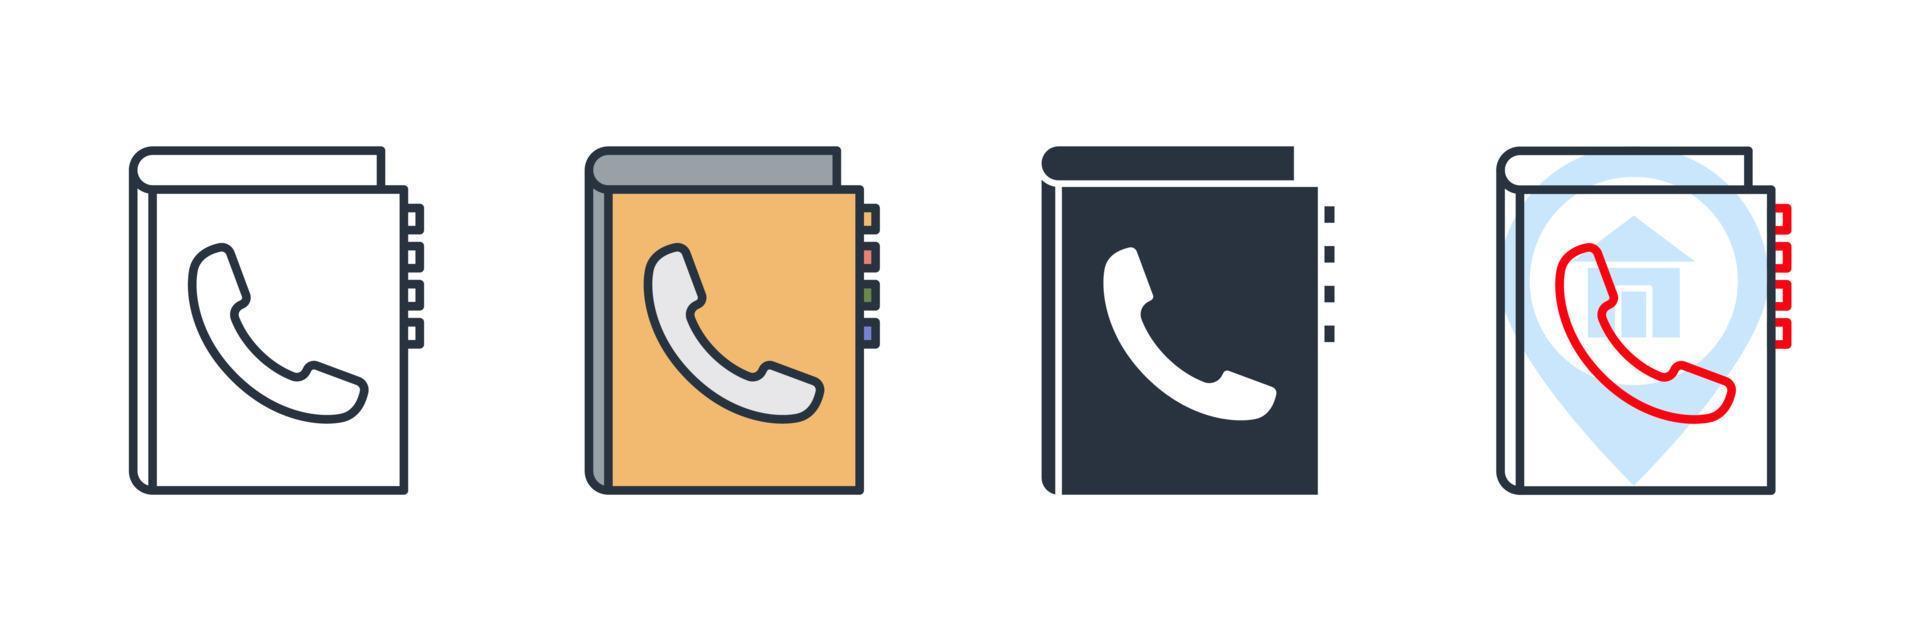 contact icon logo vector illustration. phone in book symbol template for graphic and web design collection